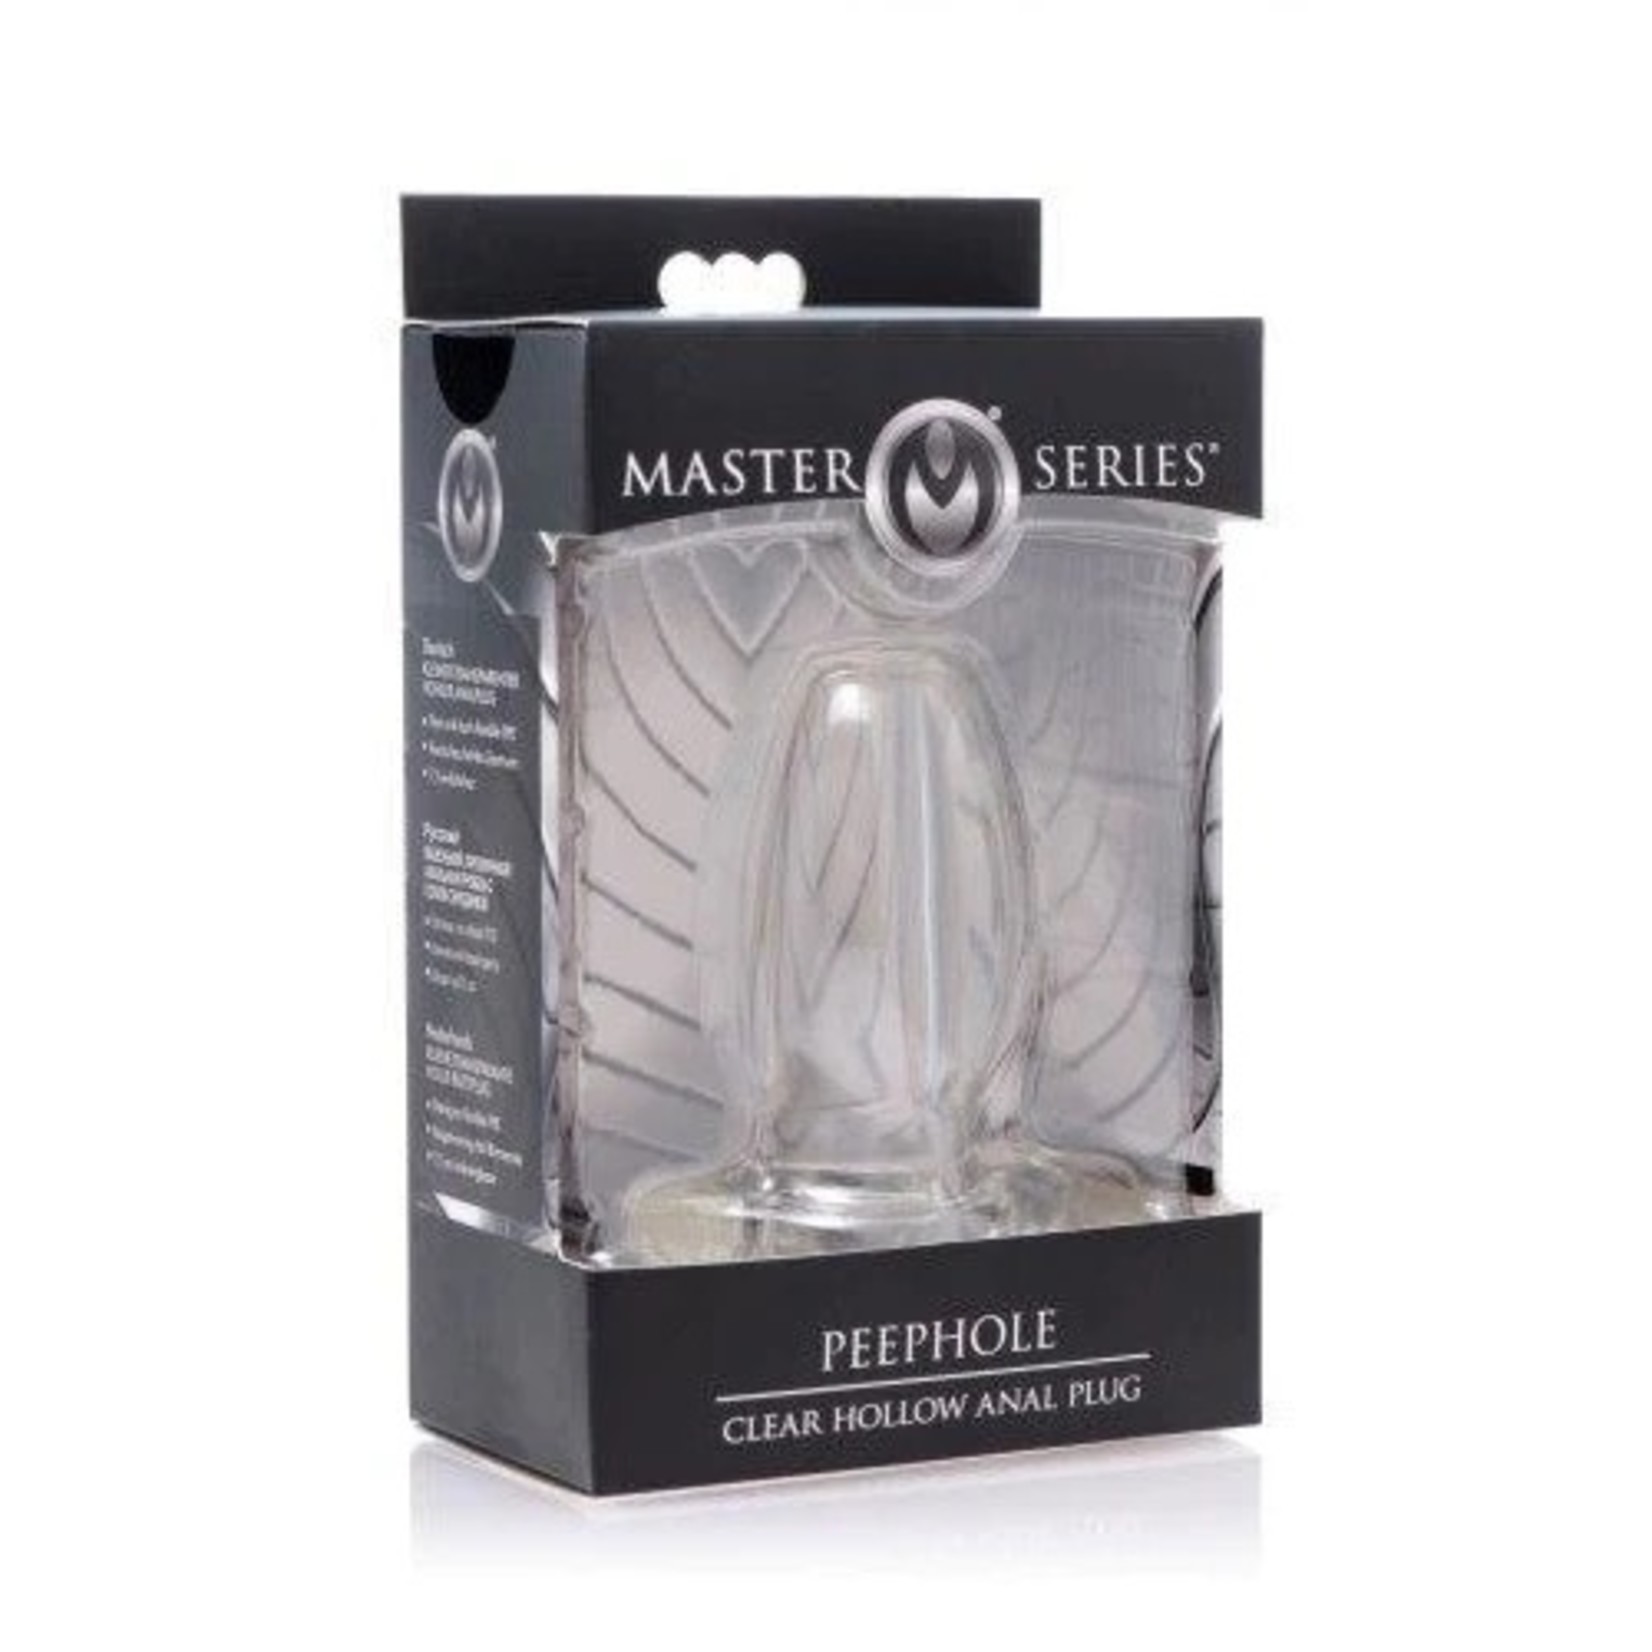 Master Series Master Series PeepHole Clear Hollow Anal Plug - Clear